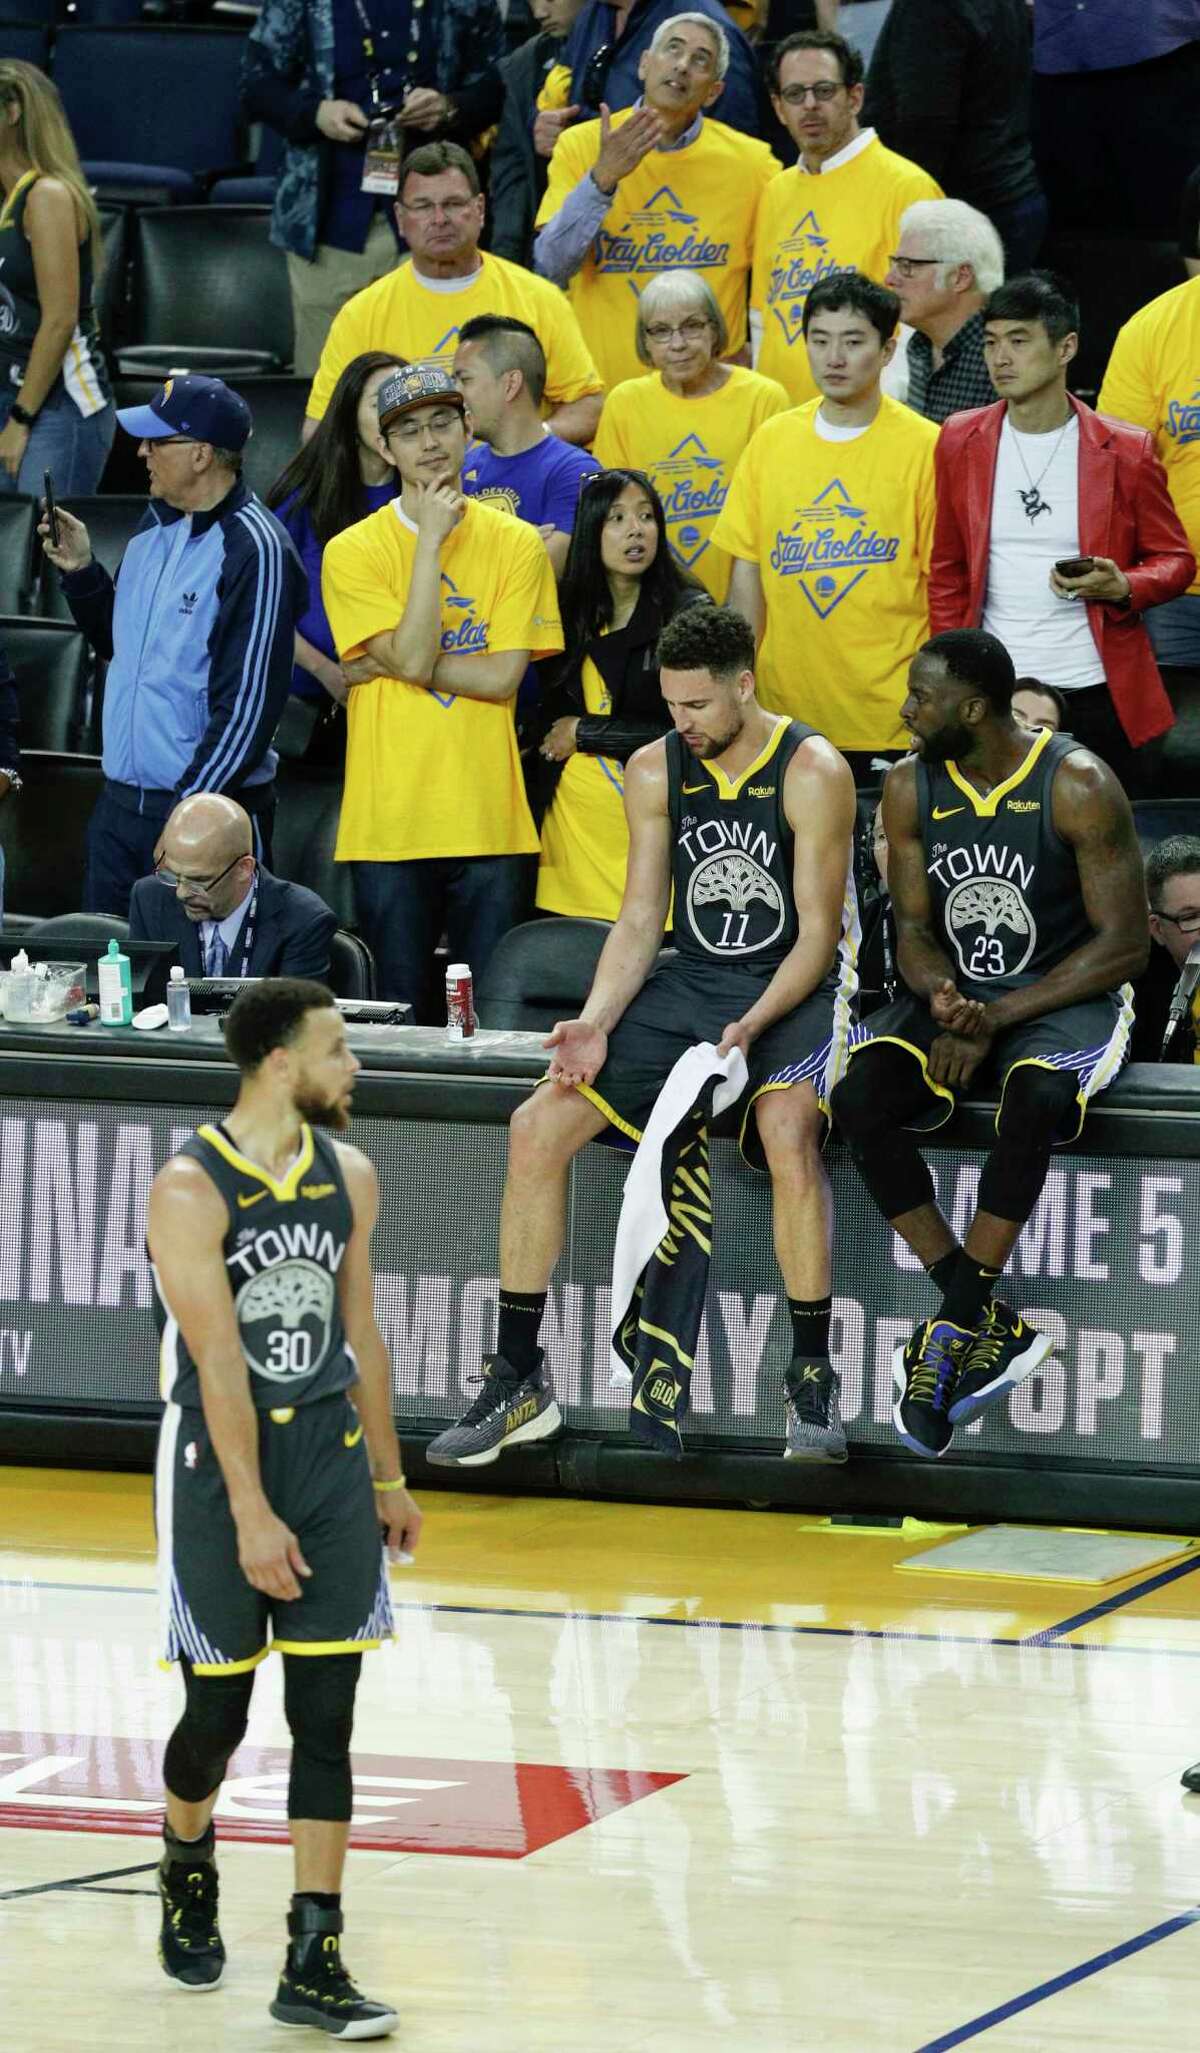 Golden State Warriors’ Stephen Curry, Klay Thompson, and Draymond Green are seen late in the fourth quarter during game 4 of the NBA Finals between the Golden State Warriors and the Toronto Raptors at Oracle Arena on Friday, June 7, 2019 in Oakland, Calif.